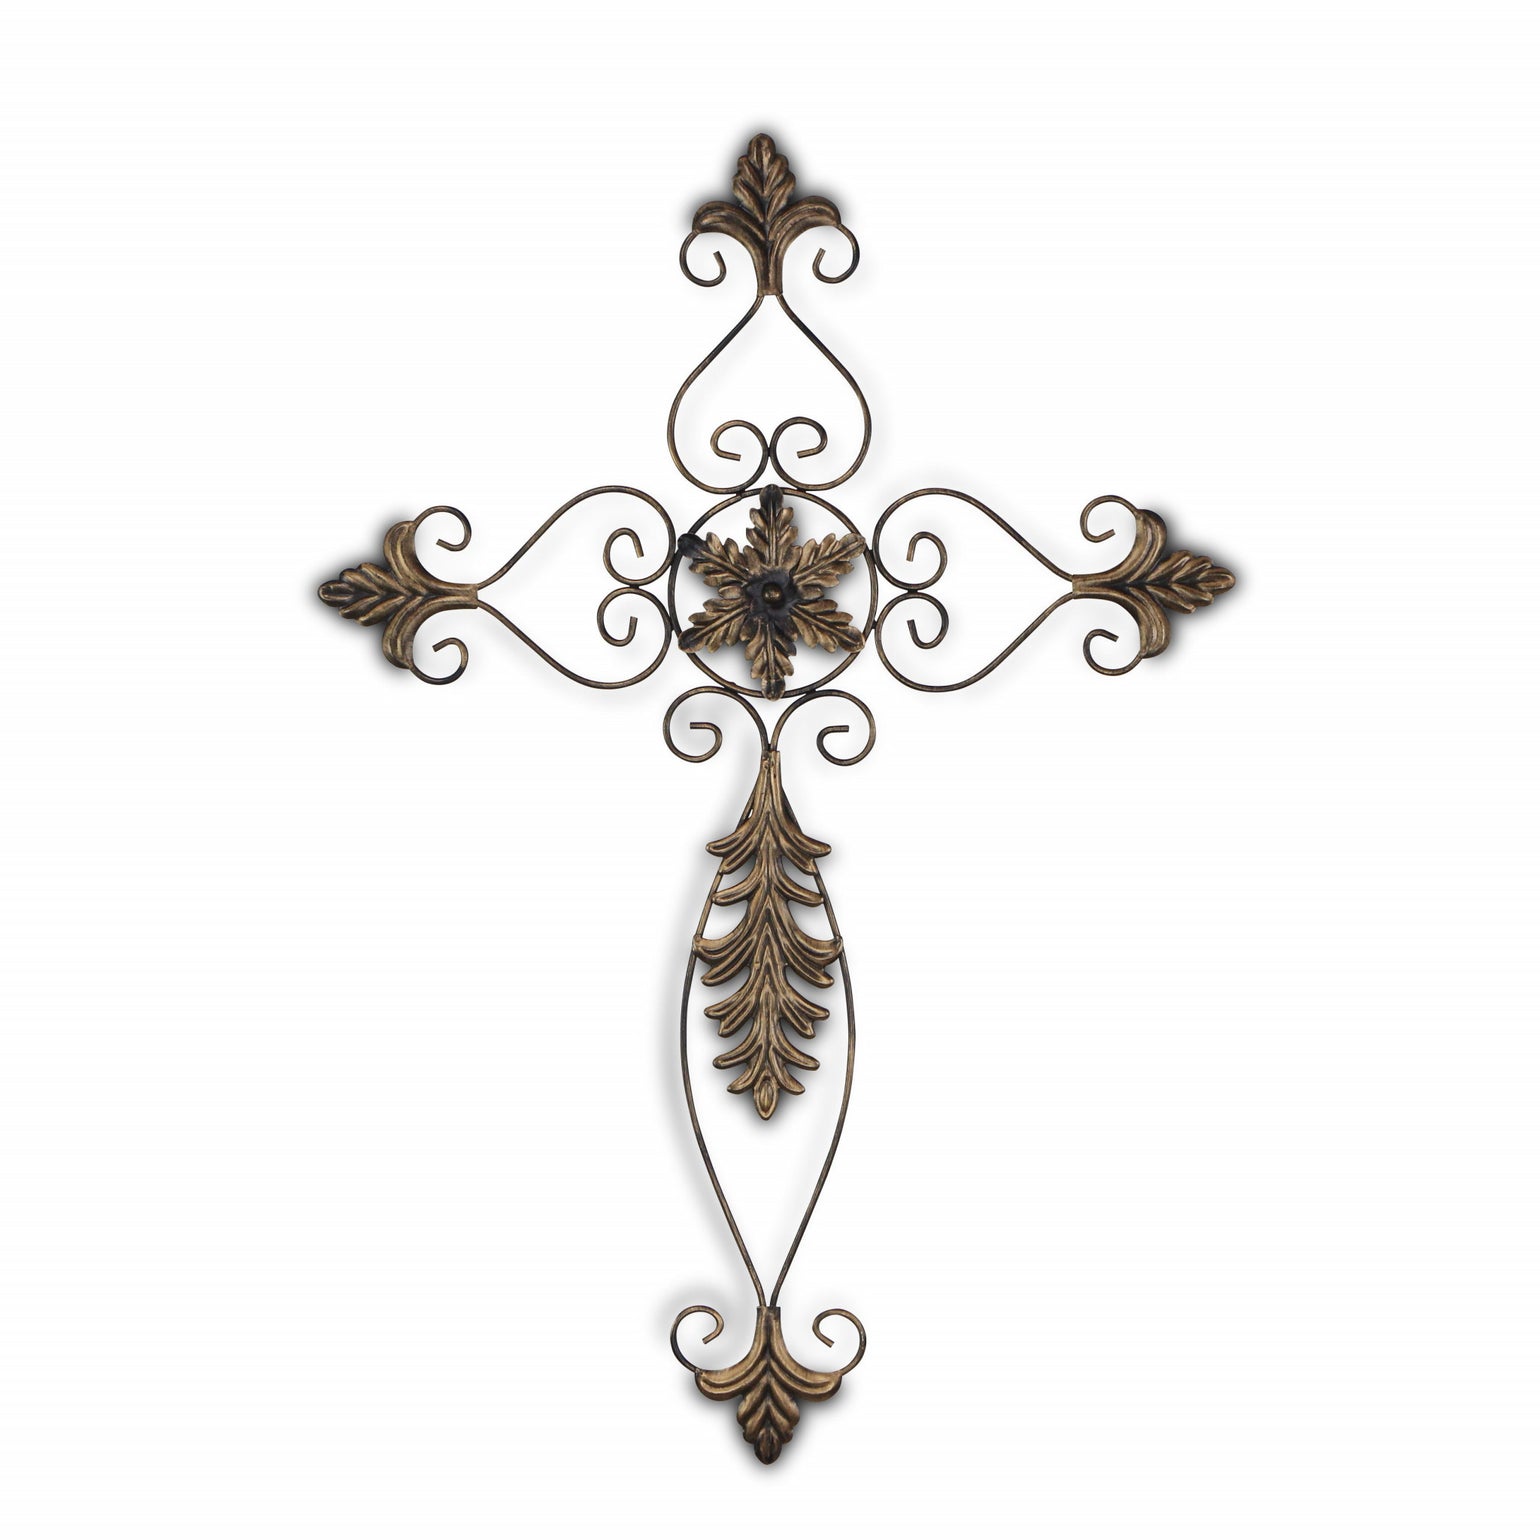 Rustic Burnished Golden Brown Metal Scroll Hanging Wall Cross | 30